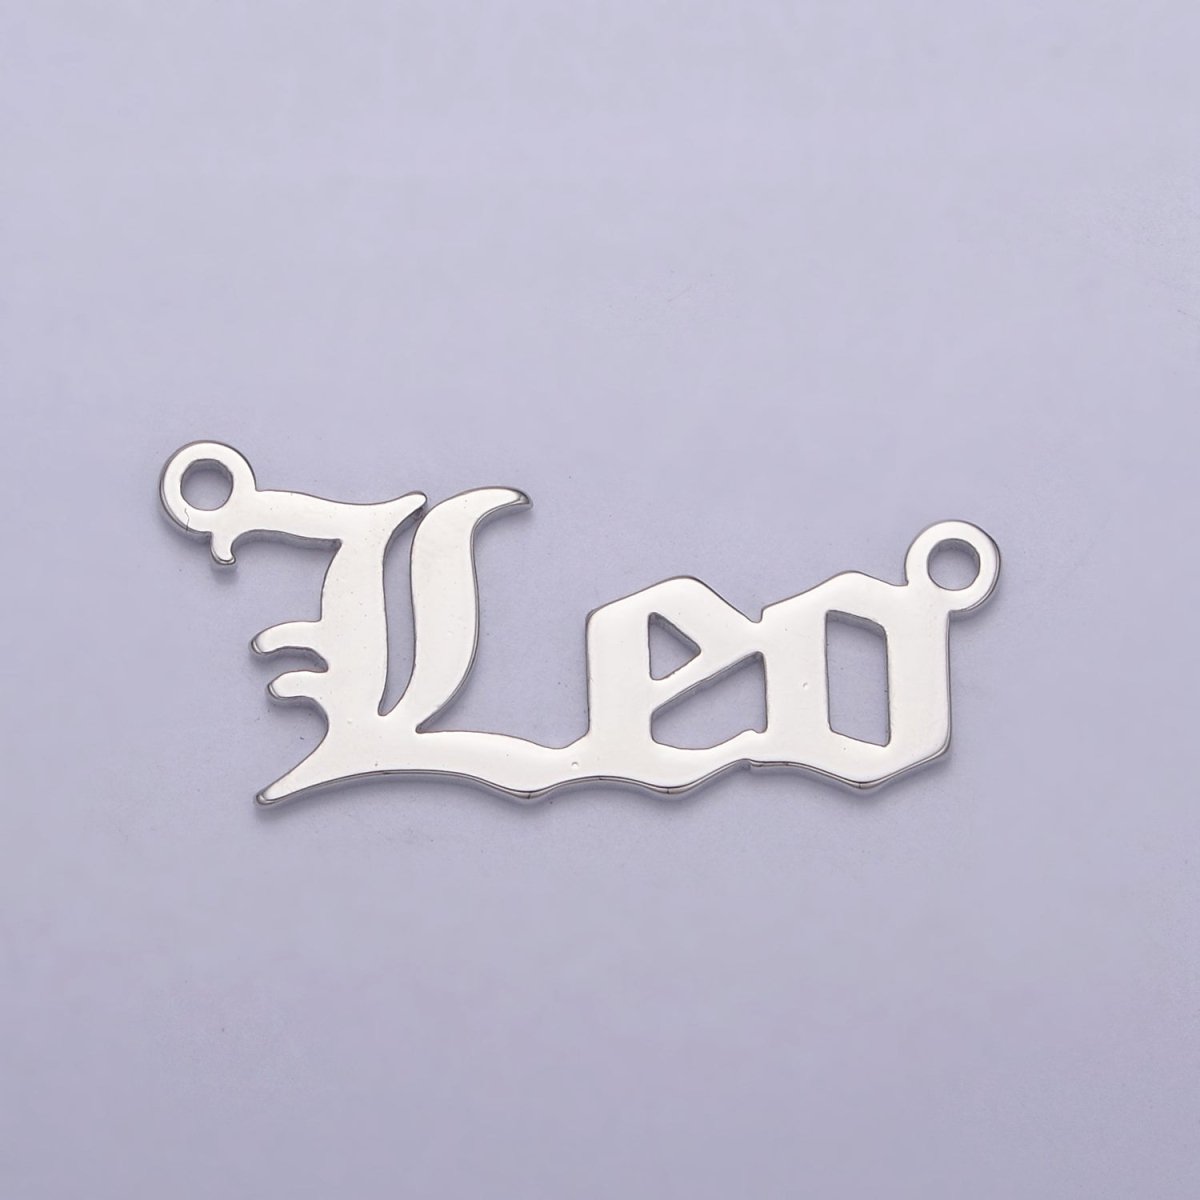 Silver Old English Font Zodiac Charms Connector for Necklace Bracelet Link Connector Astrology Necklace Charm Personalized Jewelry Wholesale ZODIAC-44 W-055~W-067 - DLUXCA